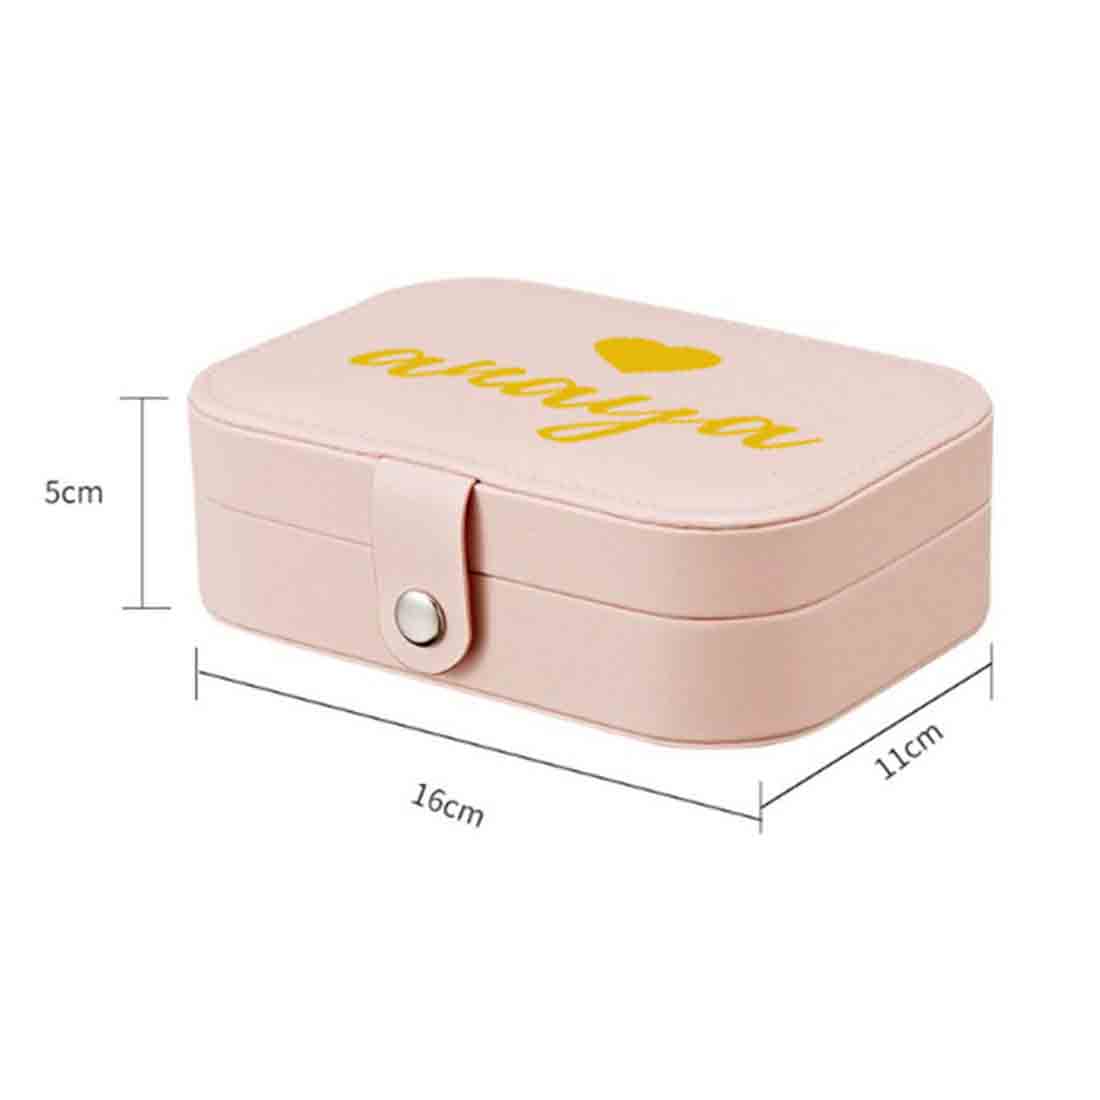 Personalized Jewellery Box for Gifting jewelry Case for Earrings Rings Pendant - Heart